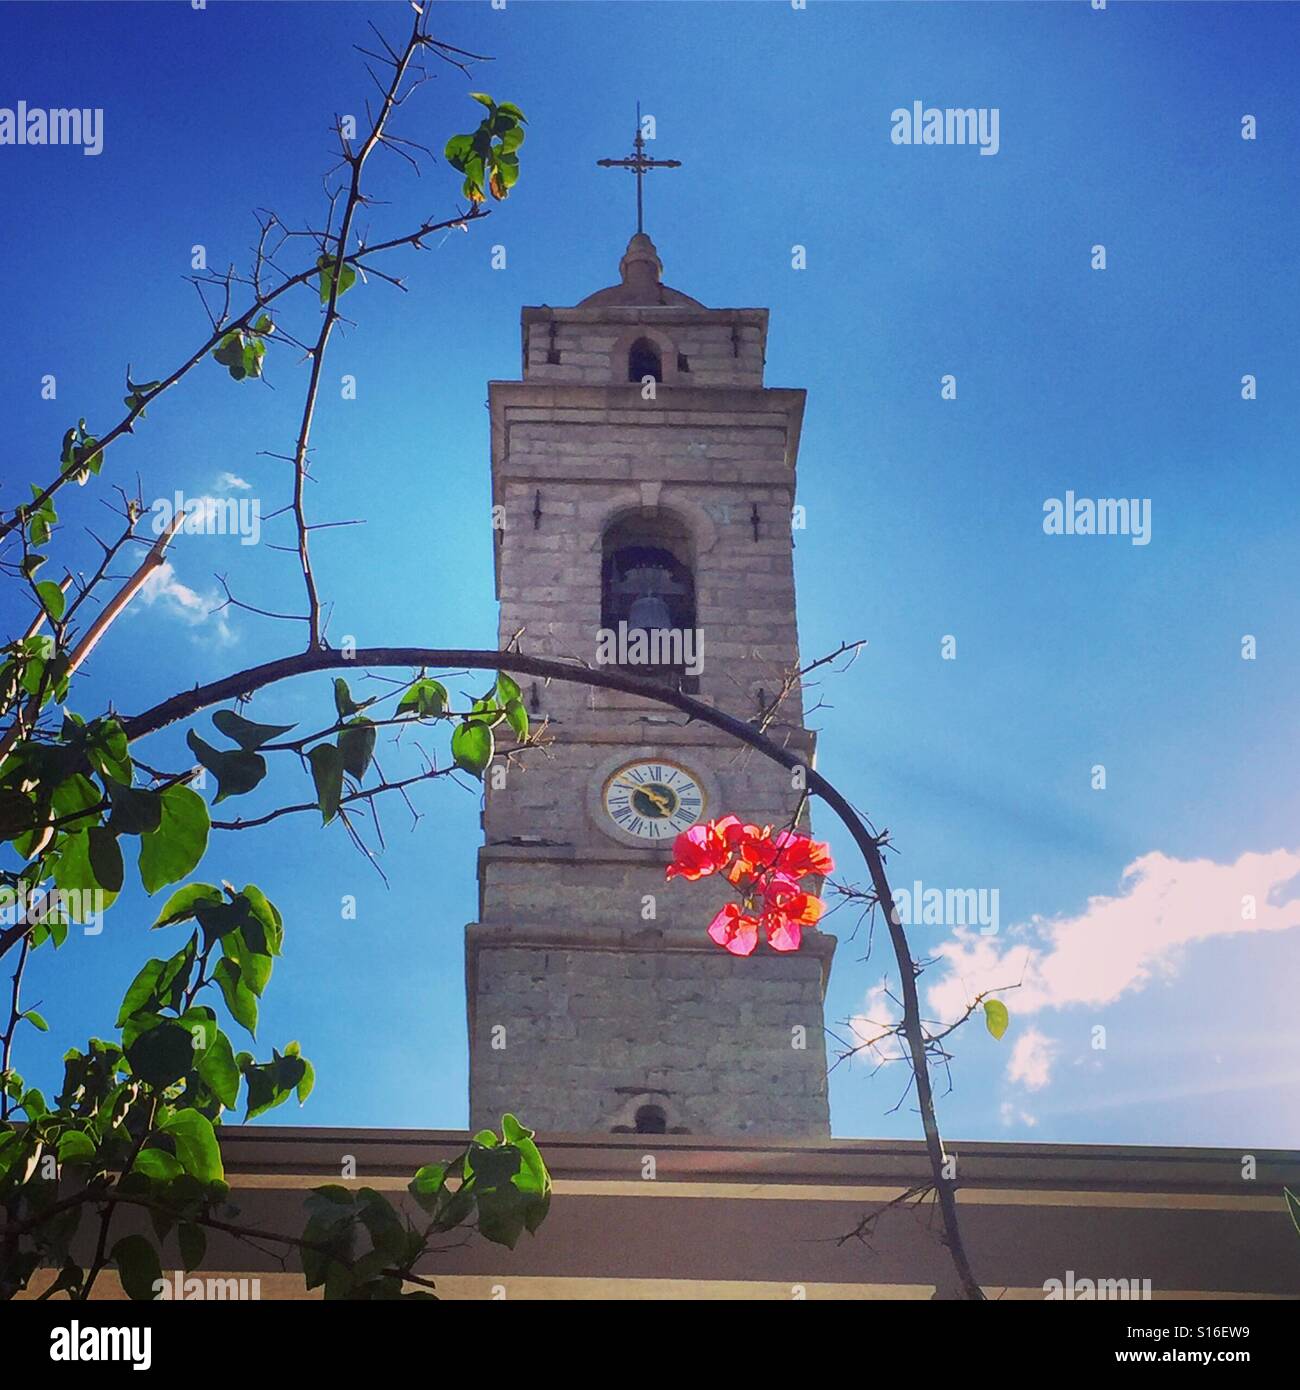 Looking up at the pink flower in front of the church bell tower Stock Photo